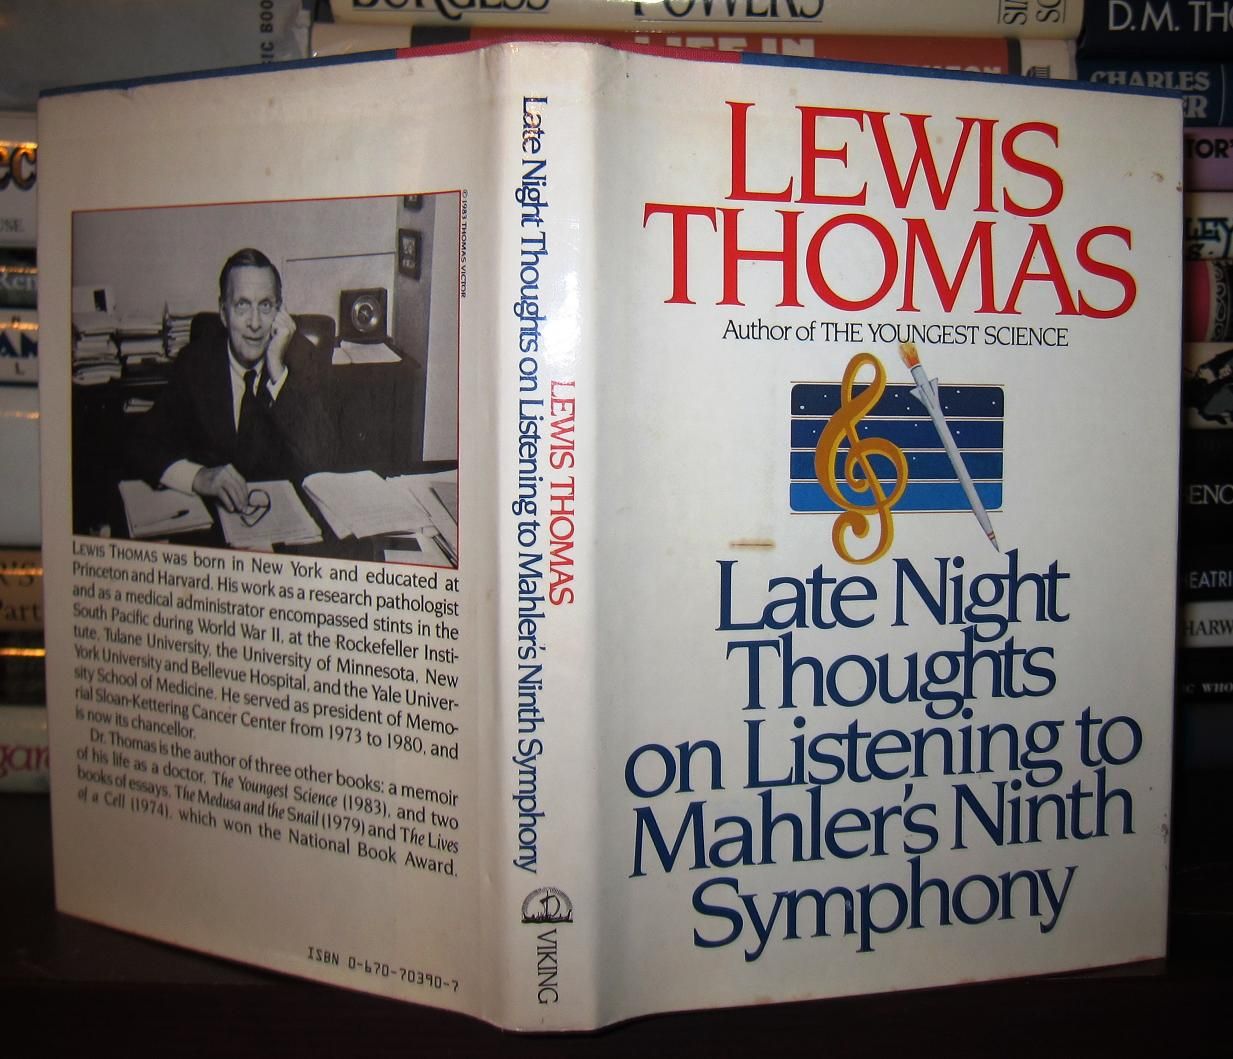 THOMAS, LEWIS - Late Night Thoughts on Listening to Mahler's Ninth Symphony